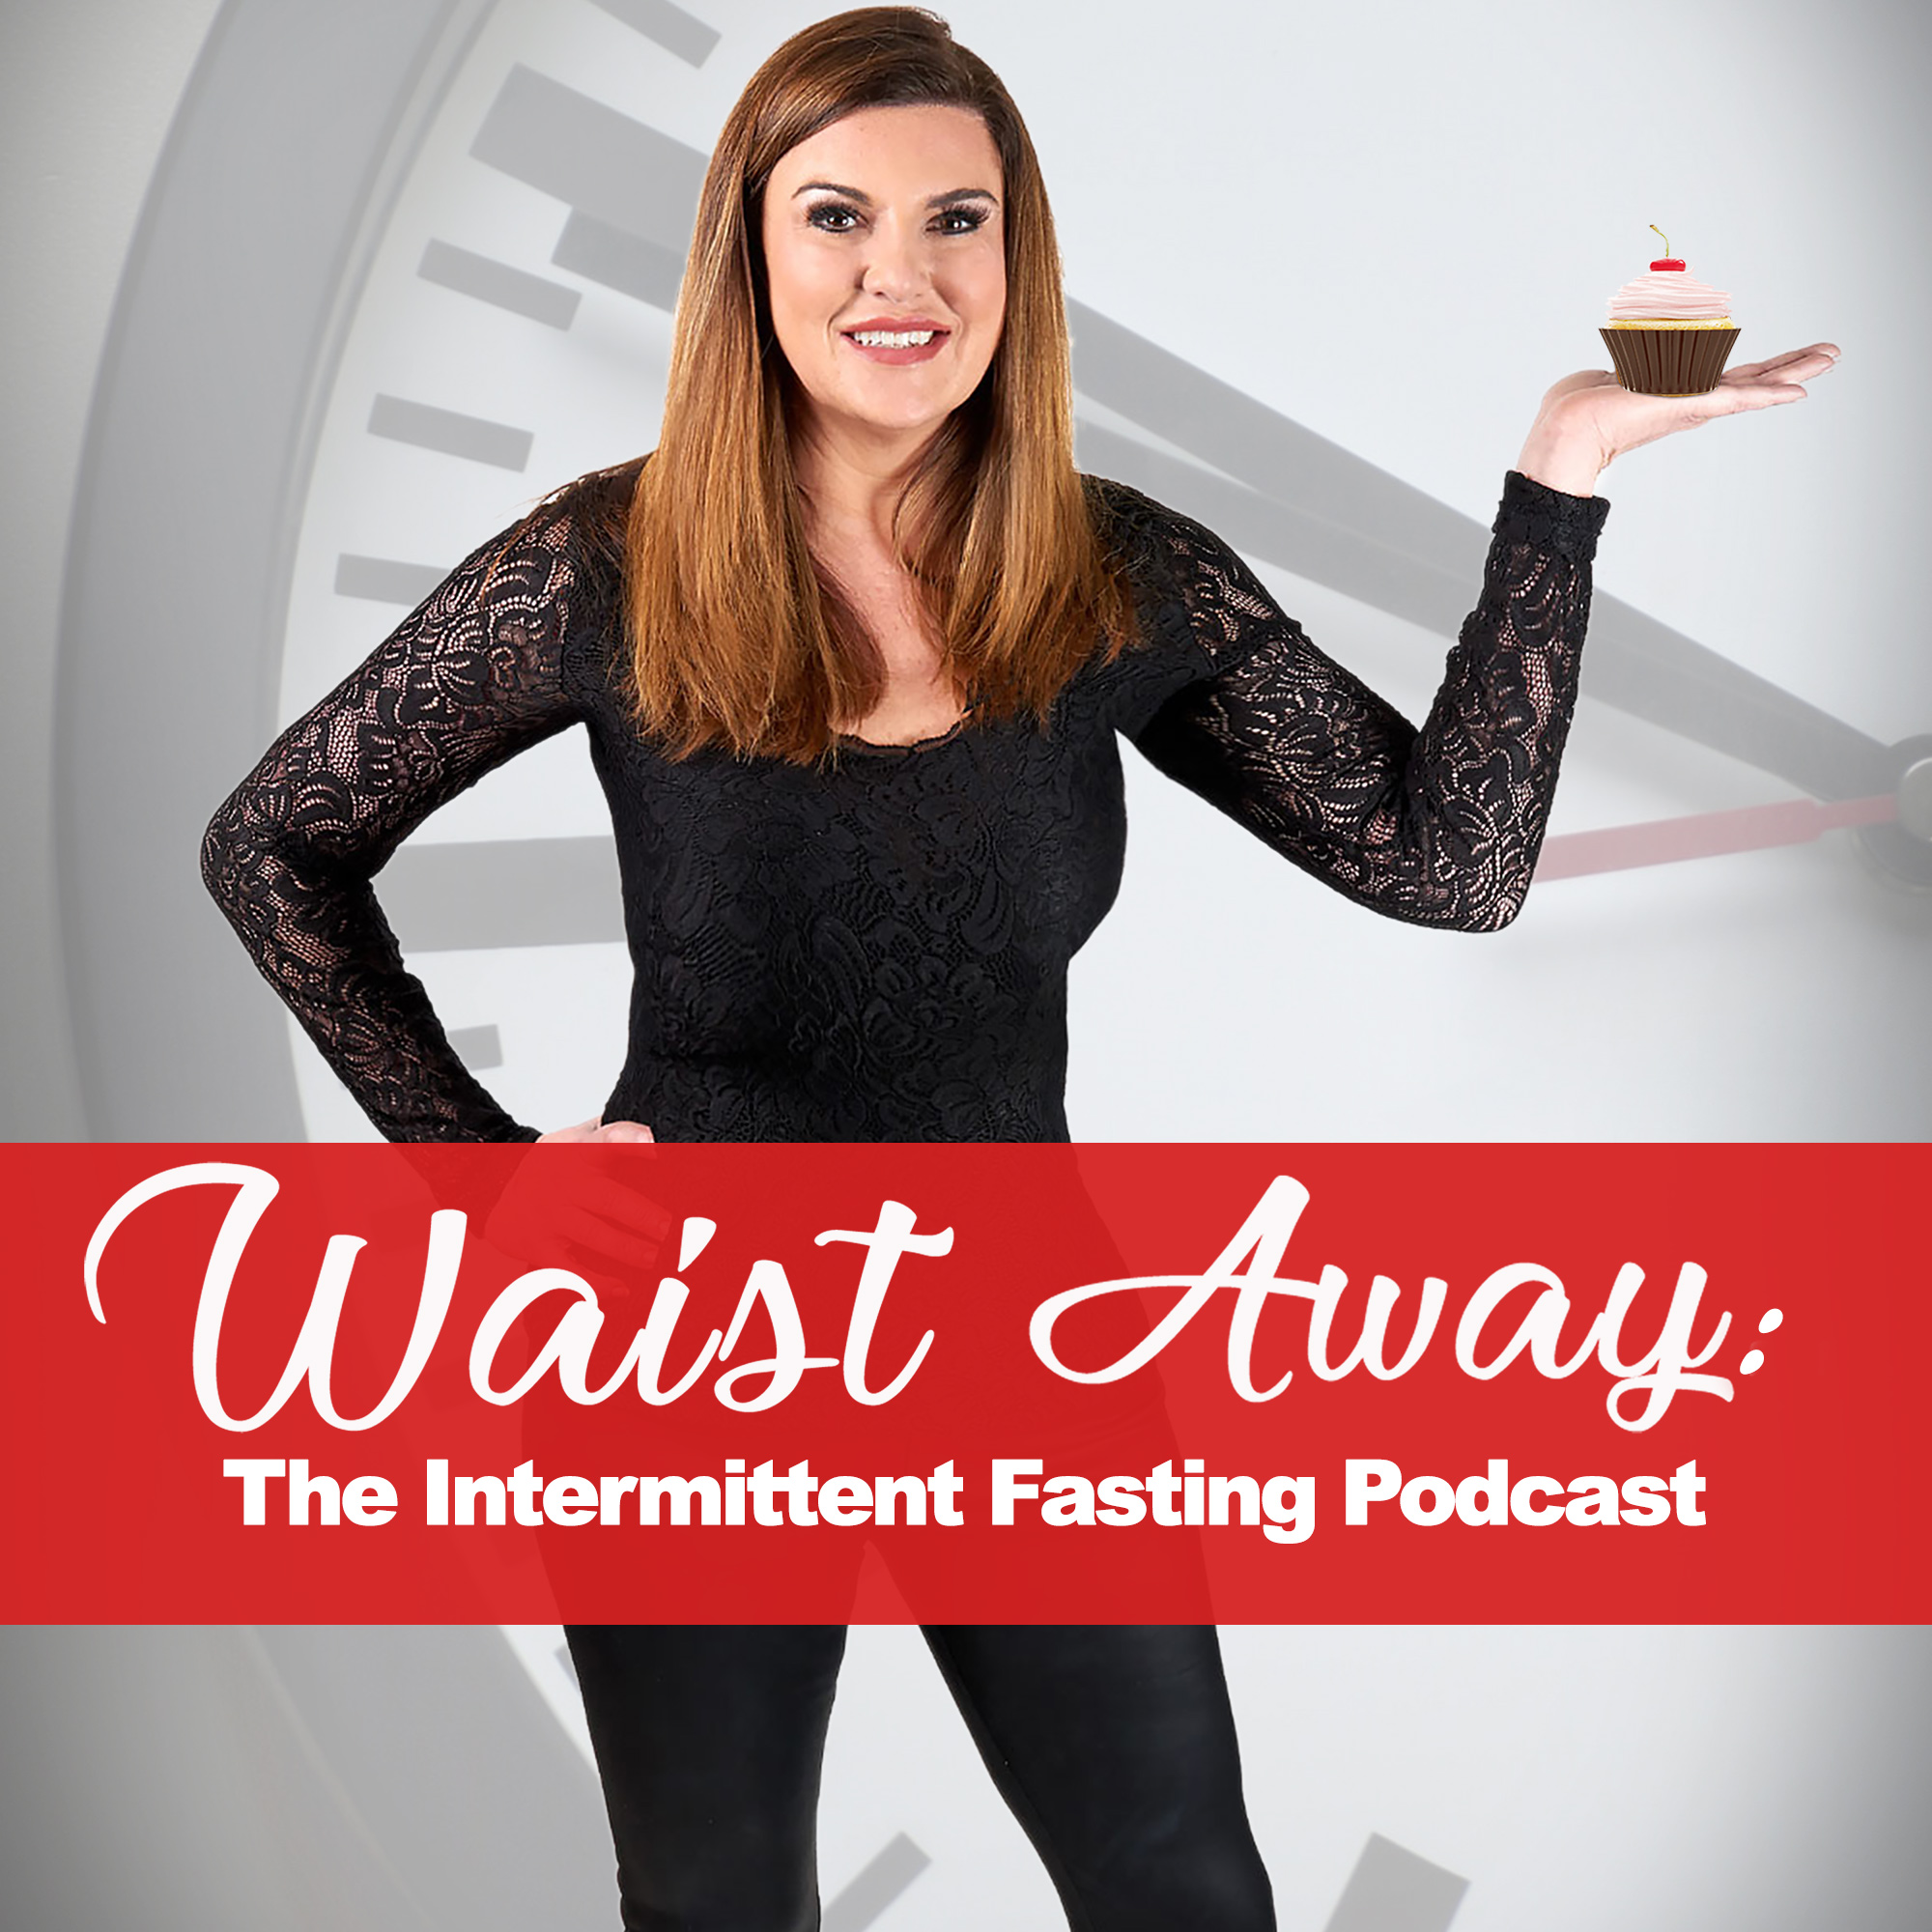 How to Survive a 3 Hour Eating Window - Favorite Clip from Episode #33 w/ Heather Roemmich